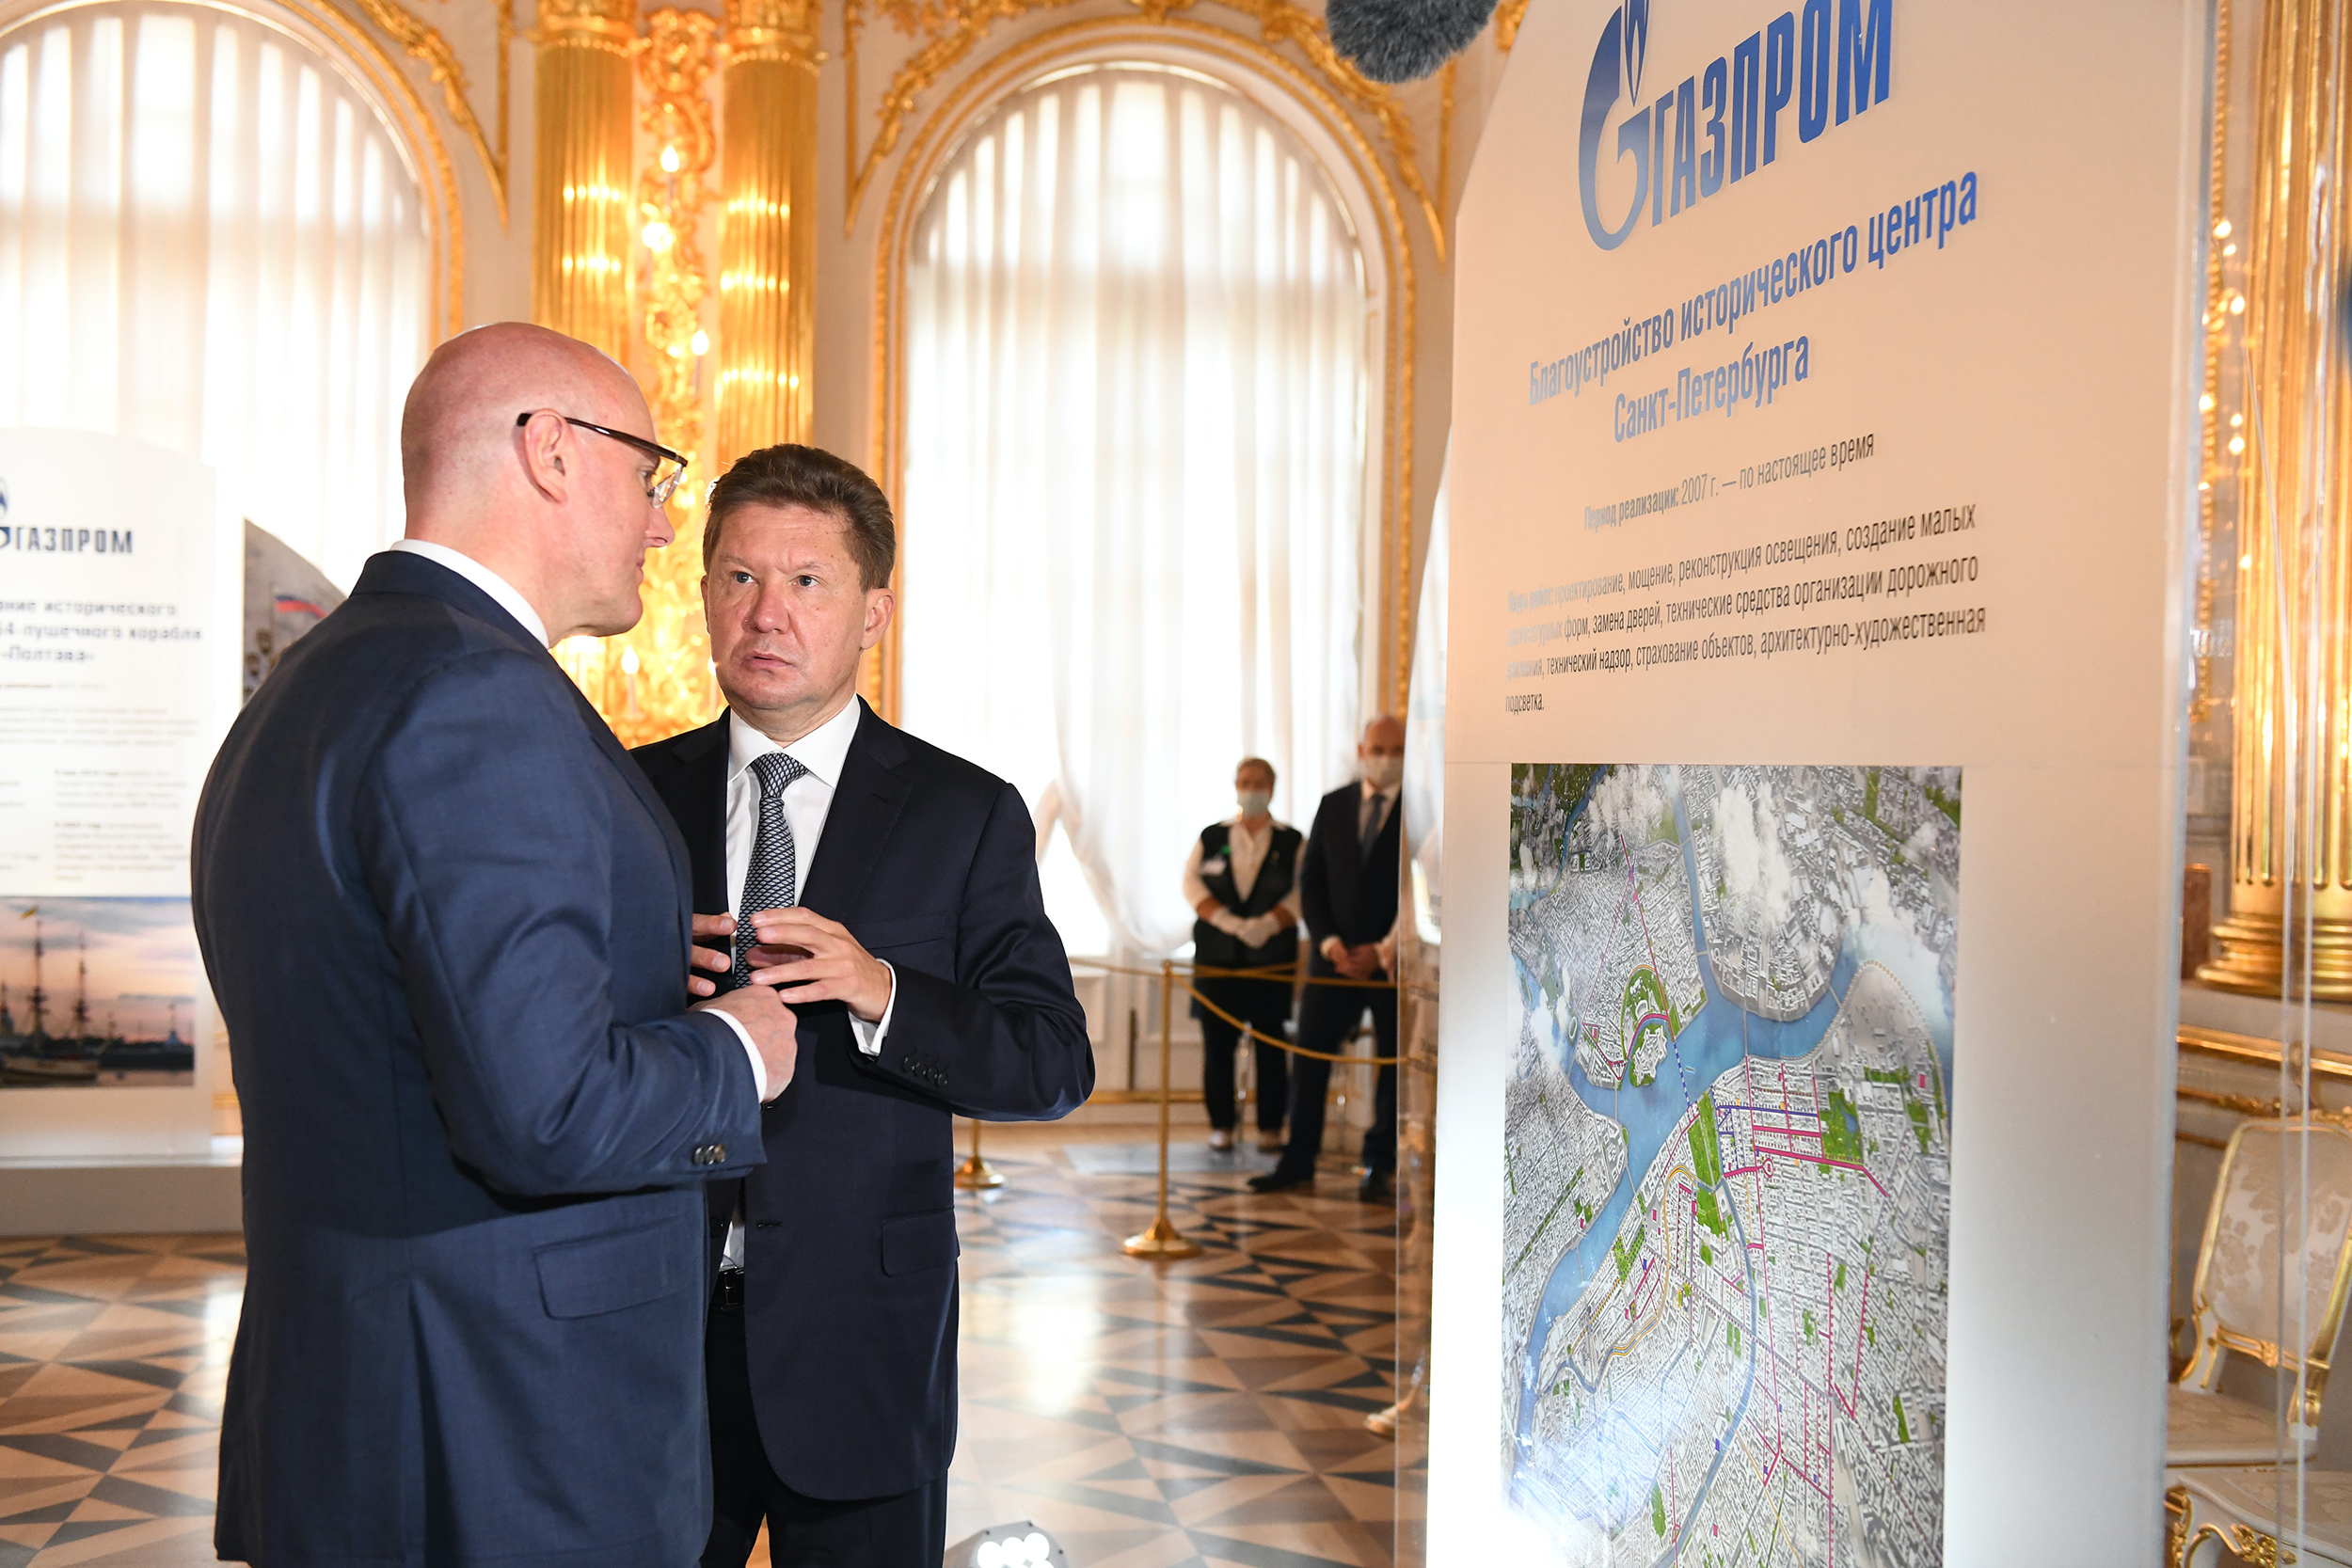 Gazprom’s projects for preserving cultural heritage and developing St. Petersburg receive high praise from Russian Government